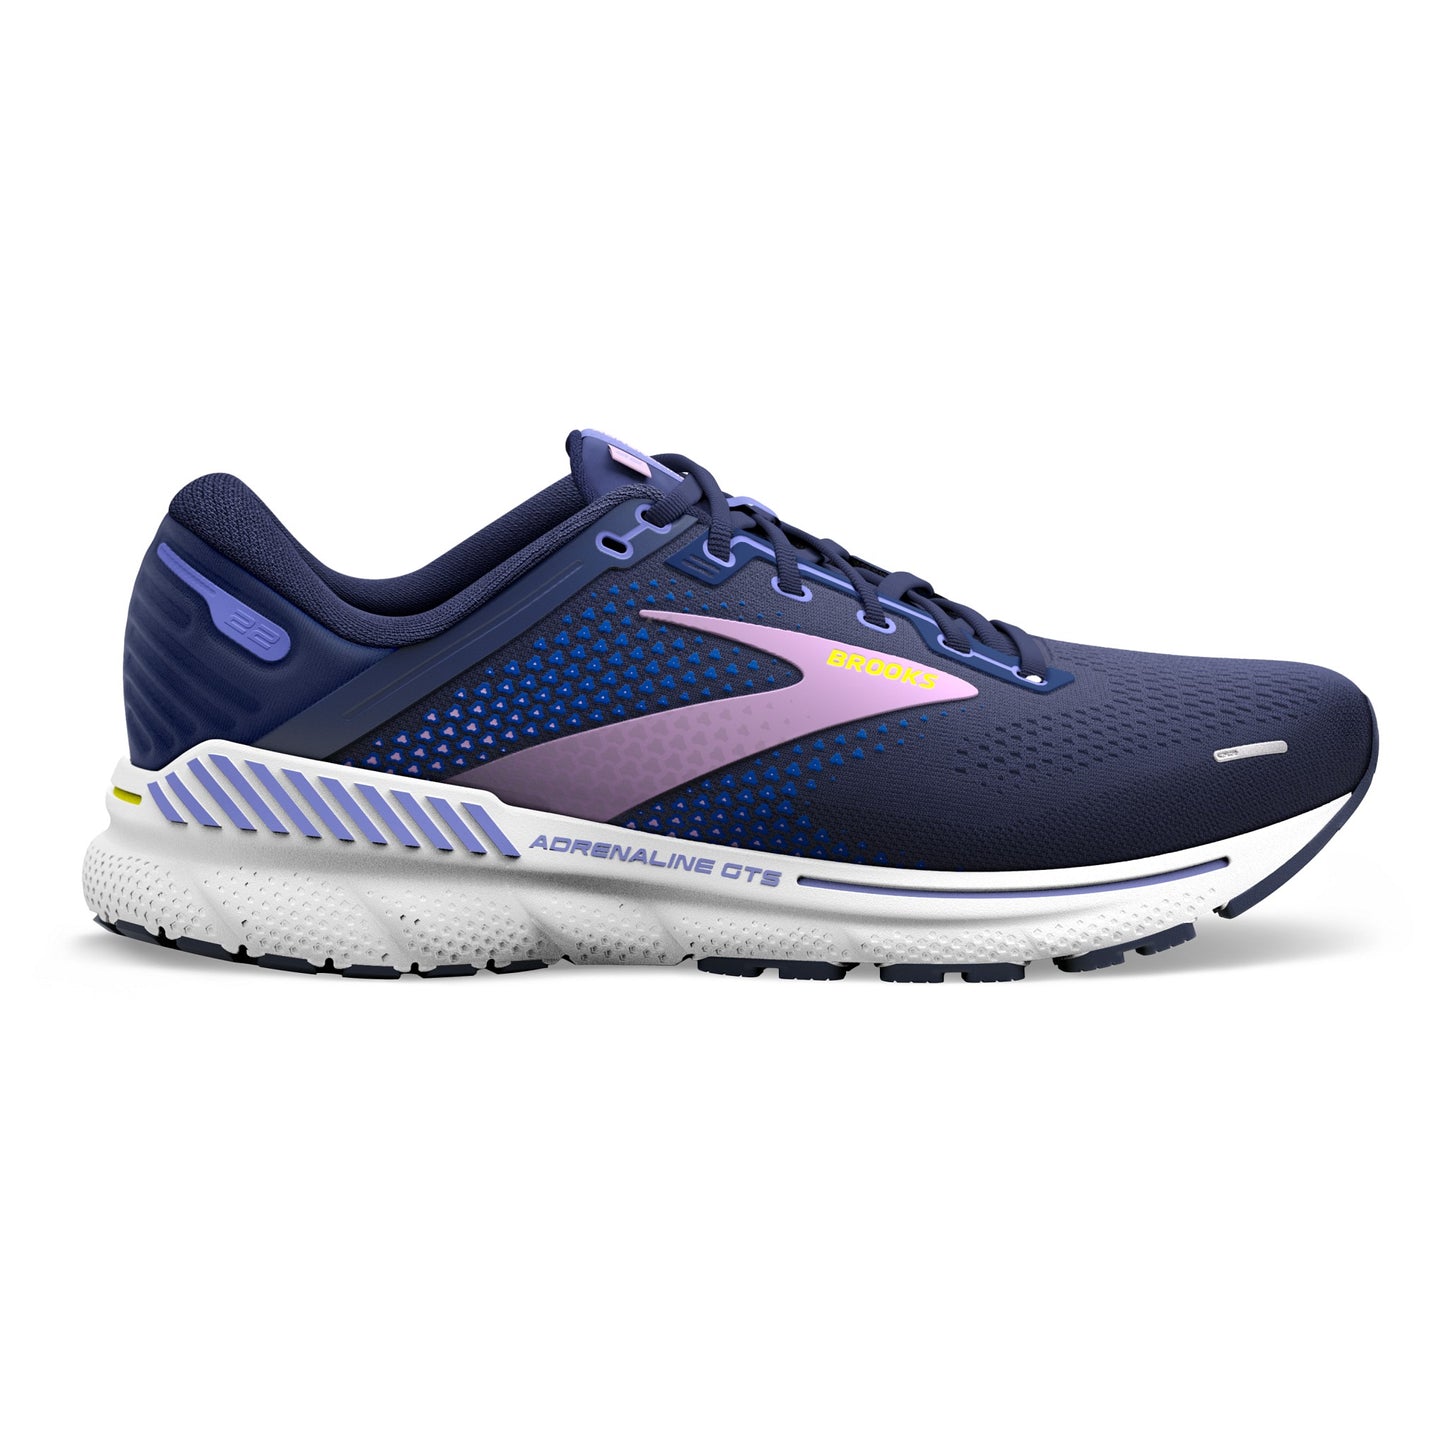 Brooks Adrenaline GTS women's support running shoes blue and light purple